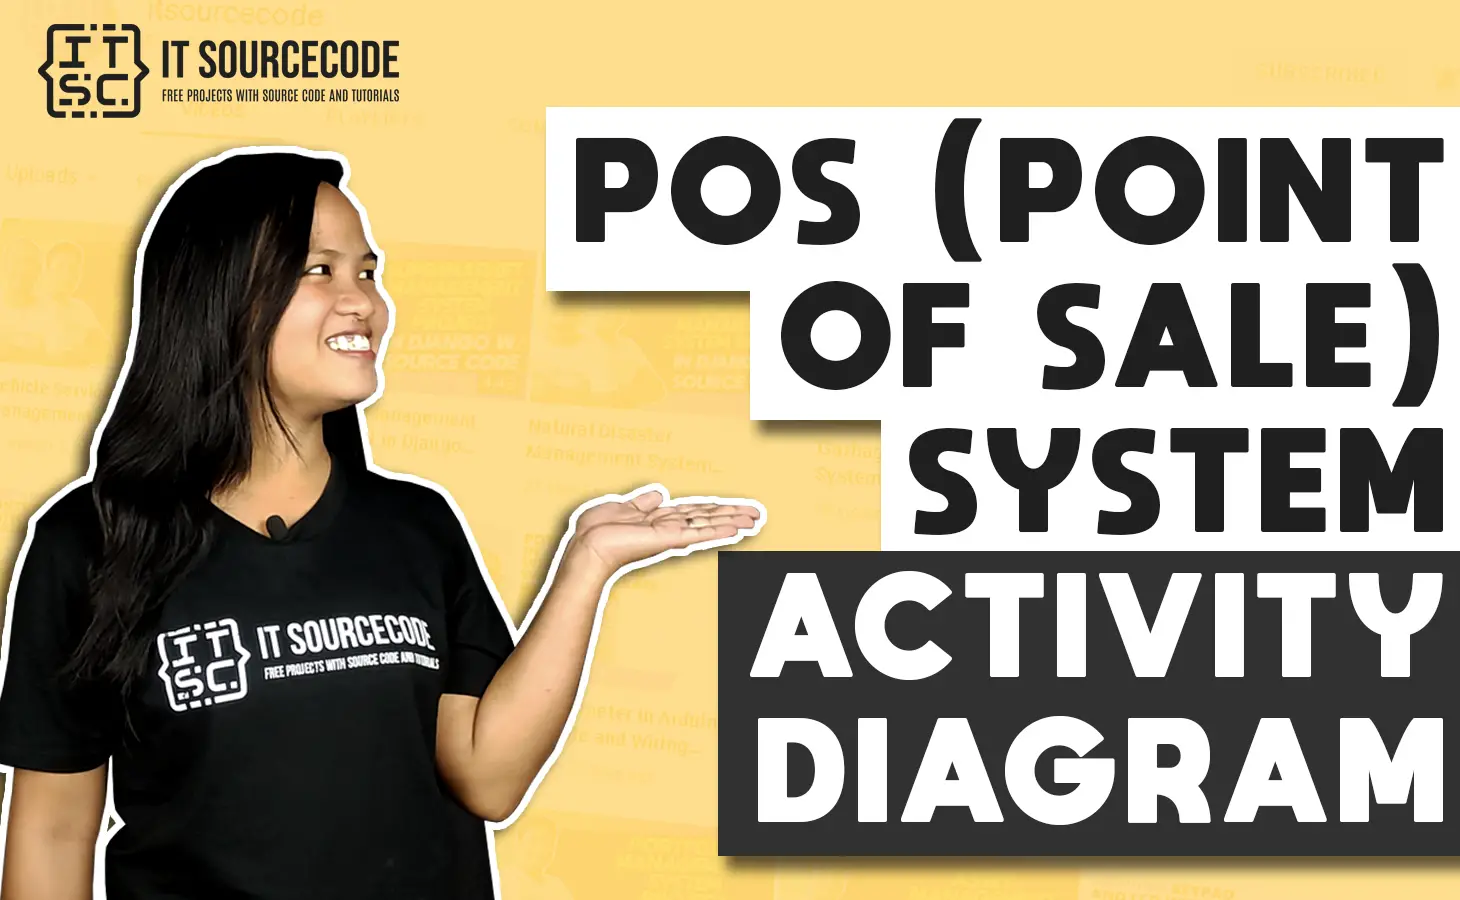 Activity Diagrams of POS Point of Sale System